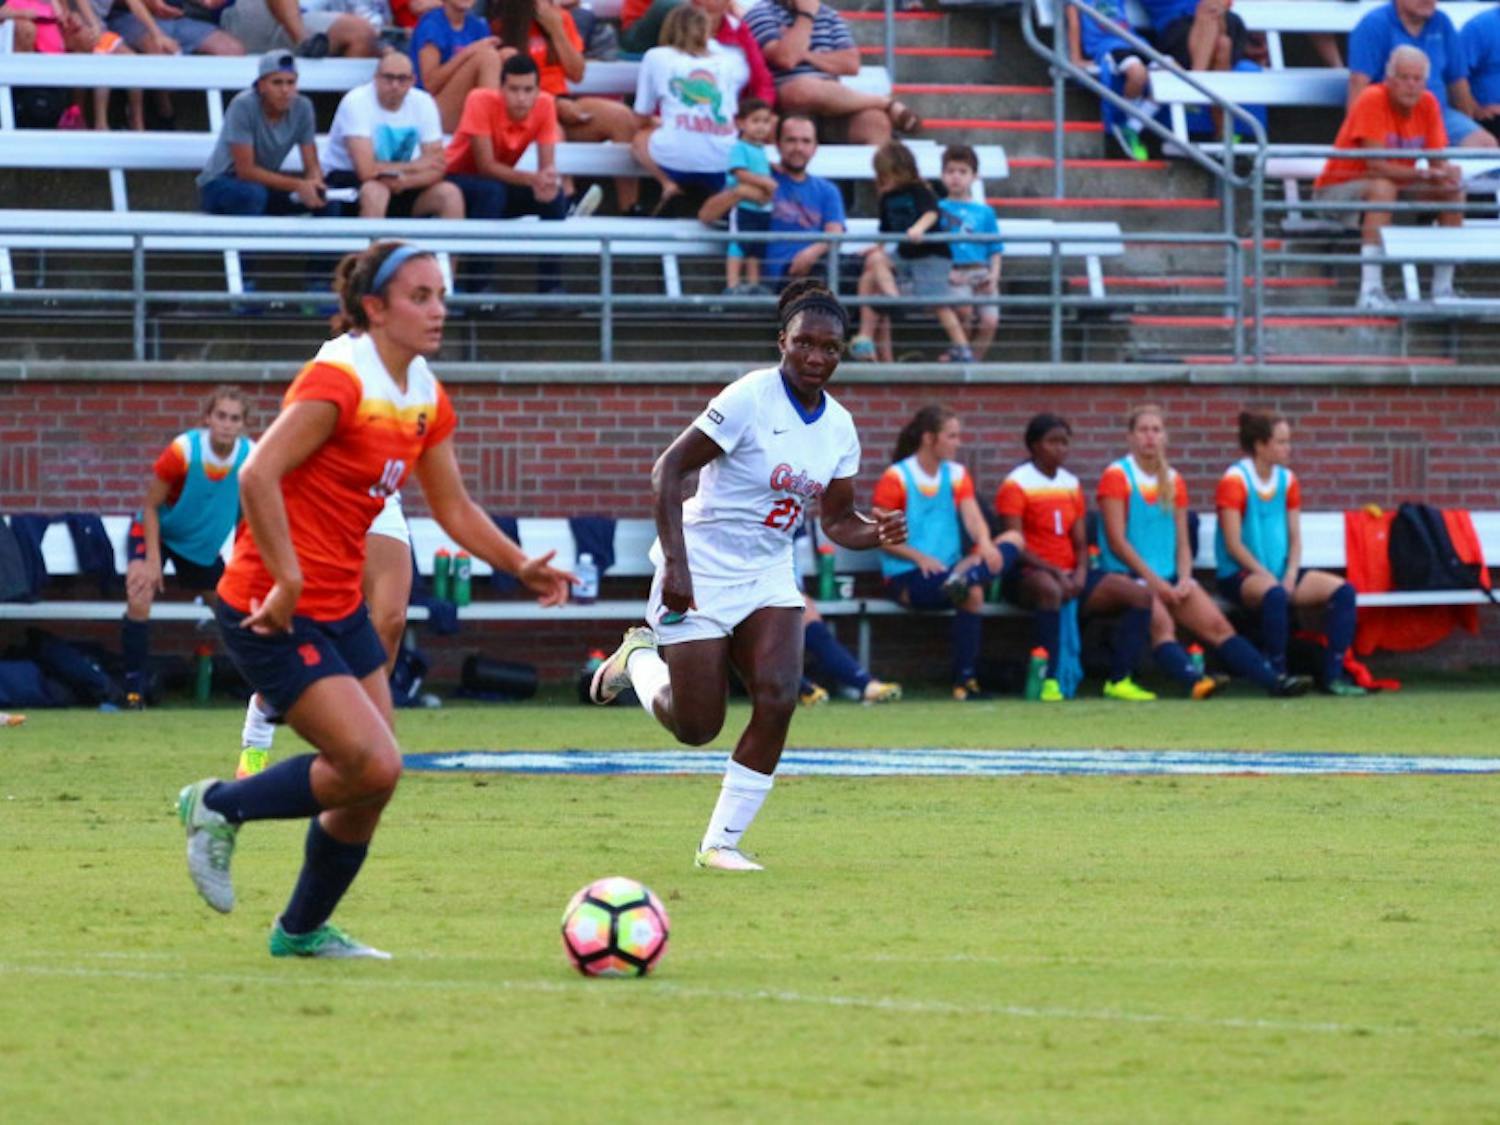 Deanne Rose chases a Syracuse player with possession of the ball during Florida's 2-1 win against the Orange on&nbsp;Aug. 27 at Donald R. Dizney Stadium.